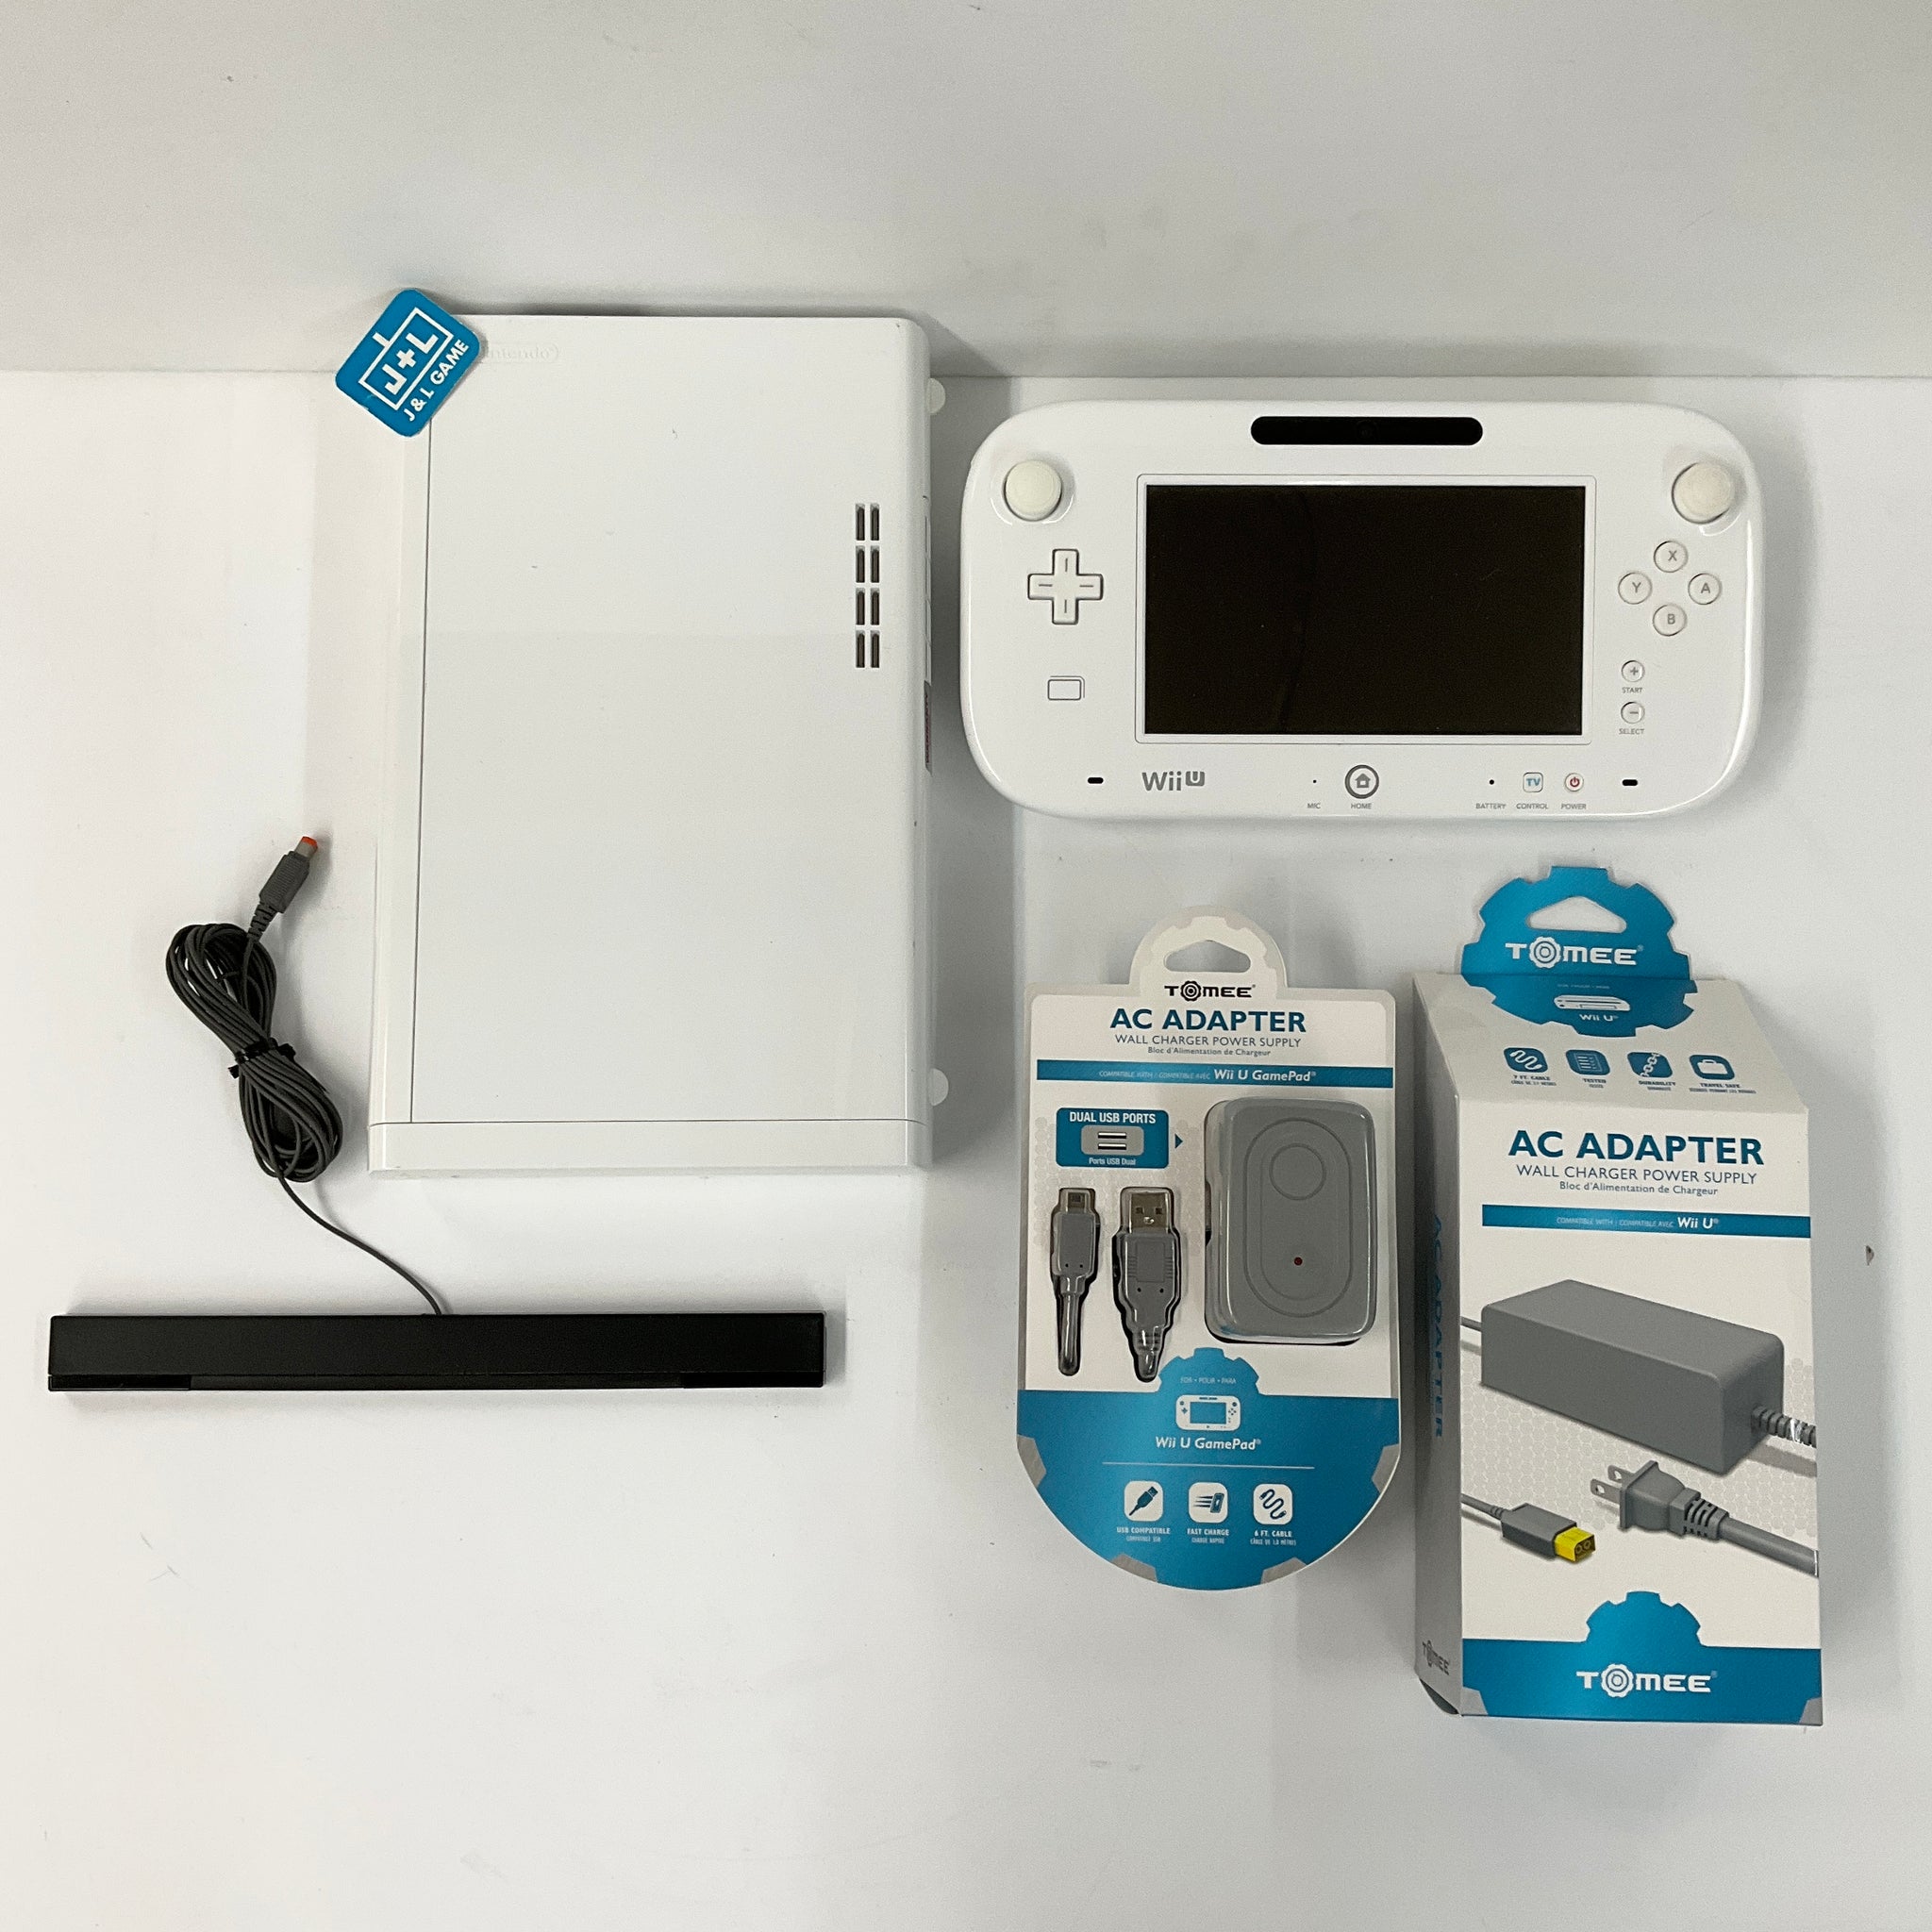 Nintendo Wii U Deluxe 32GB White Handheld System for sale online